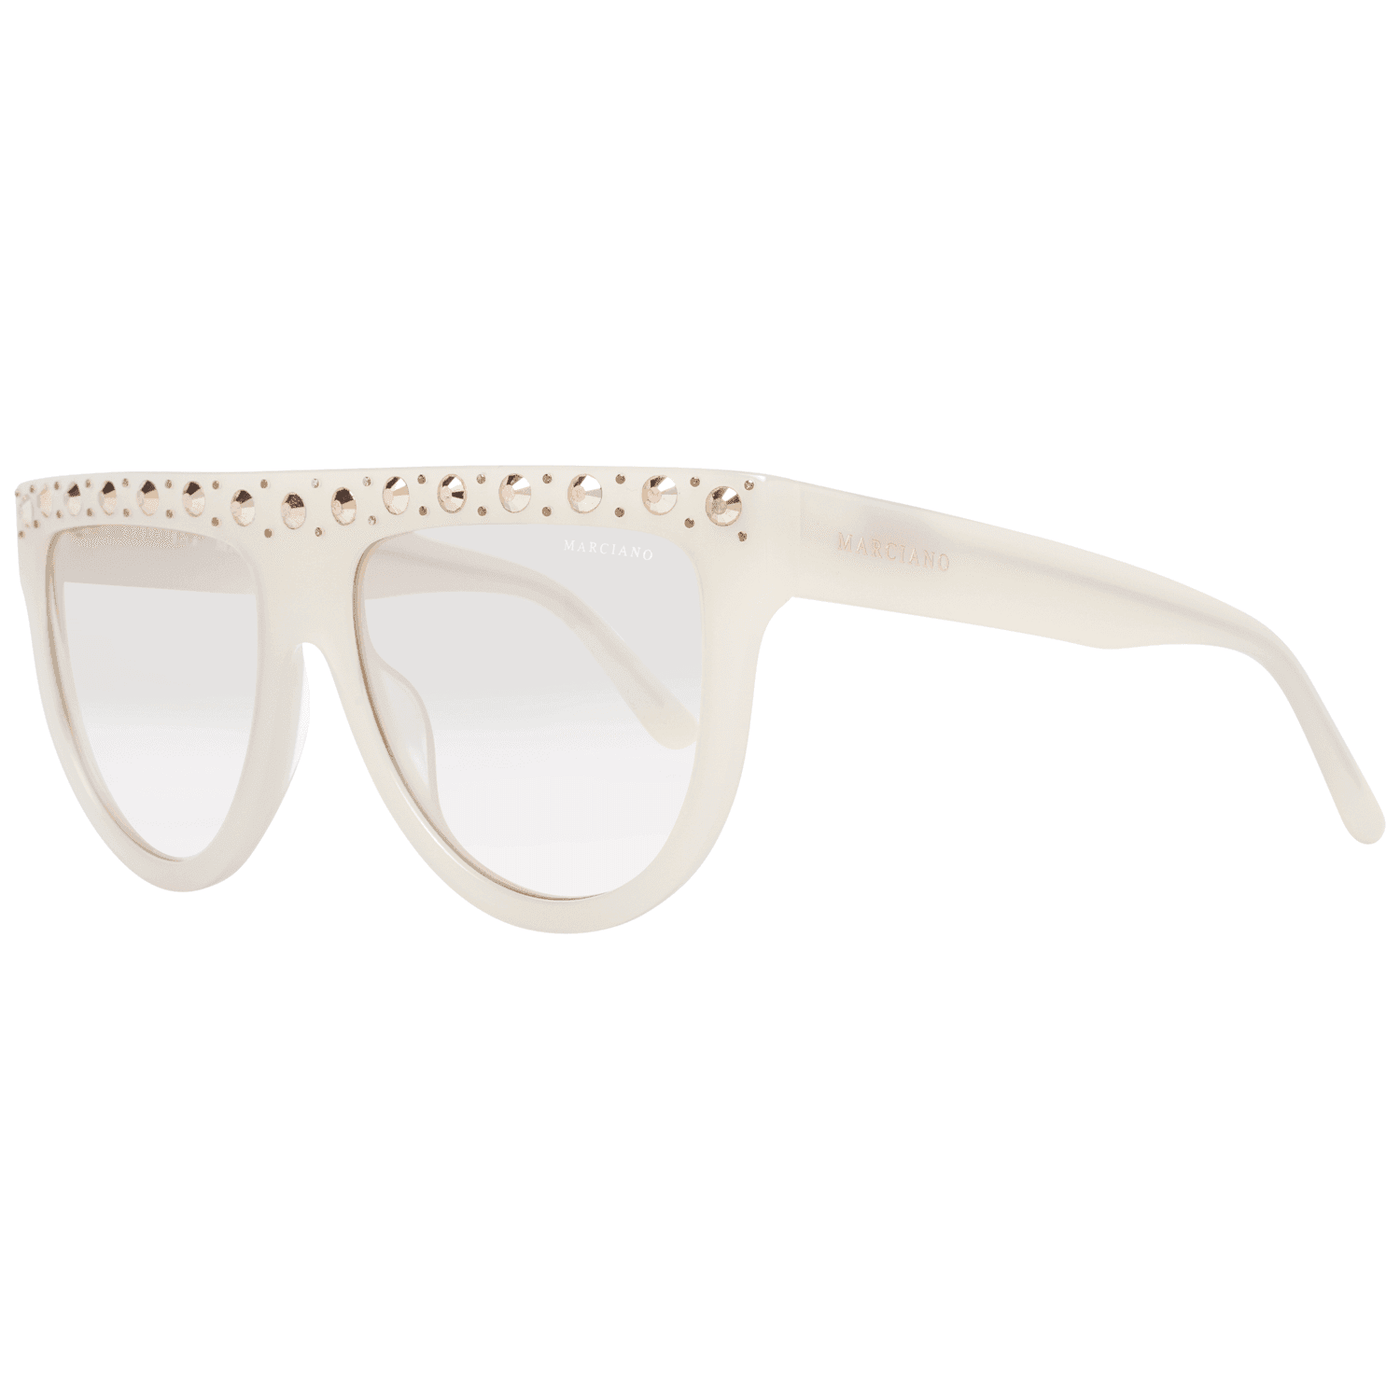 Guess By Marciano GM0795 Gradient Oval Sunglasses feed-agegroup-adult, feed-color-White, feed-gender-female, Guess By Marciano, Sunglasses for Women - Sunglasses, White at SEYMAYKA